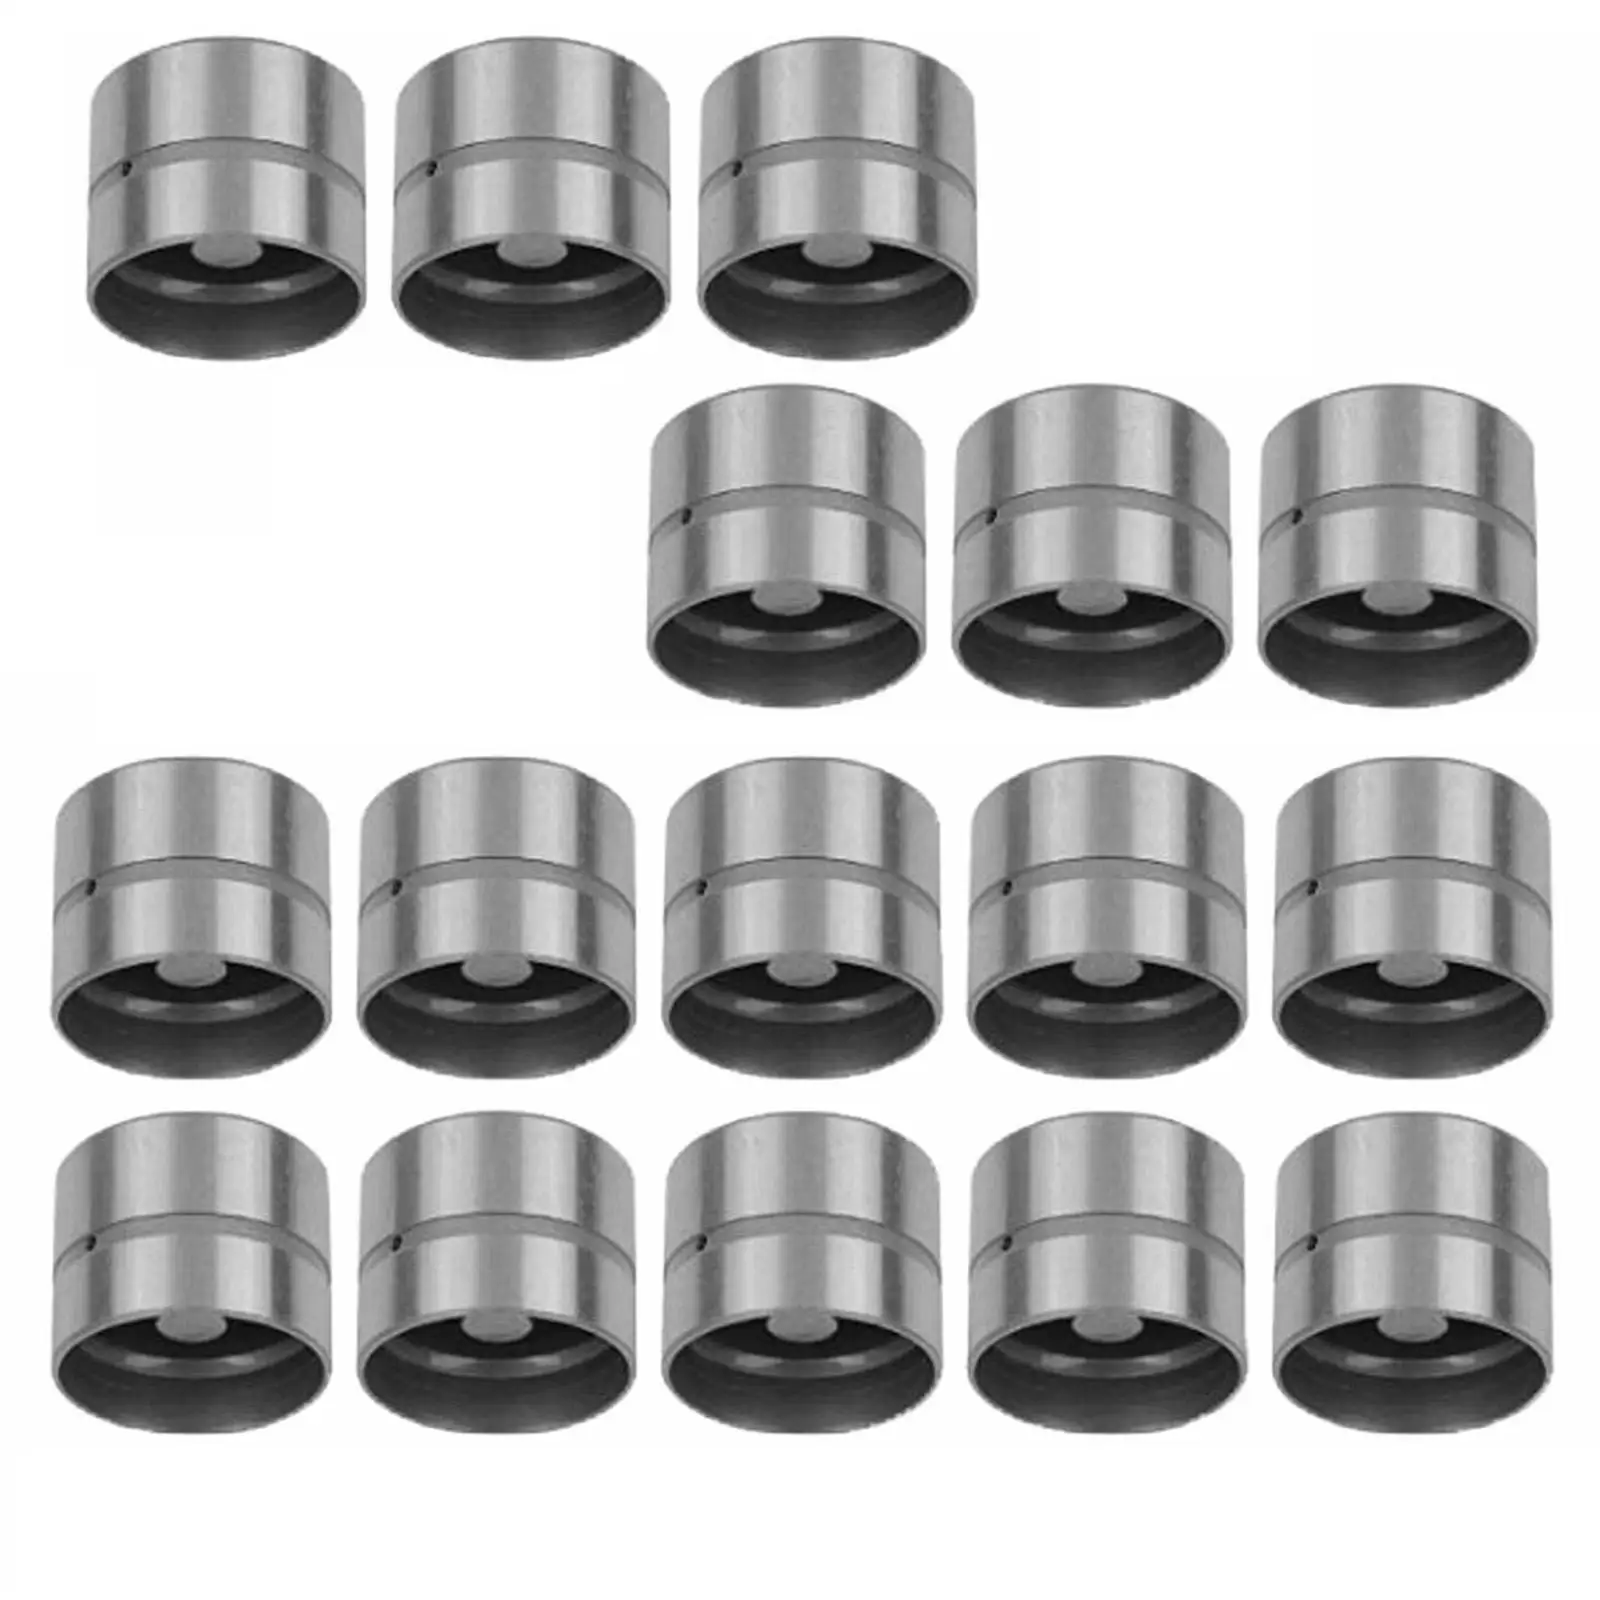 16x Hydraulic Lifters Tappets Replaces Easy to Install Professional Accessories for 20XE C20XE 420011810 90570967 85000600